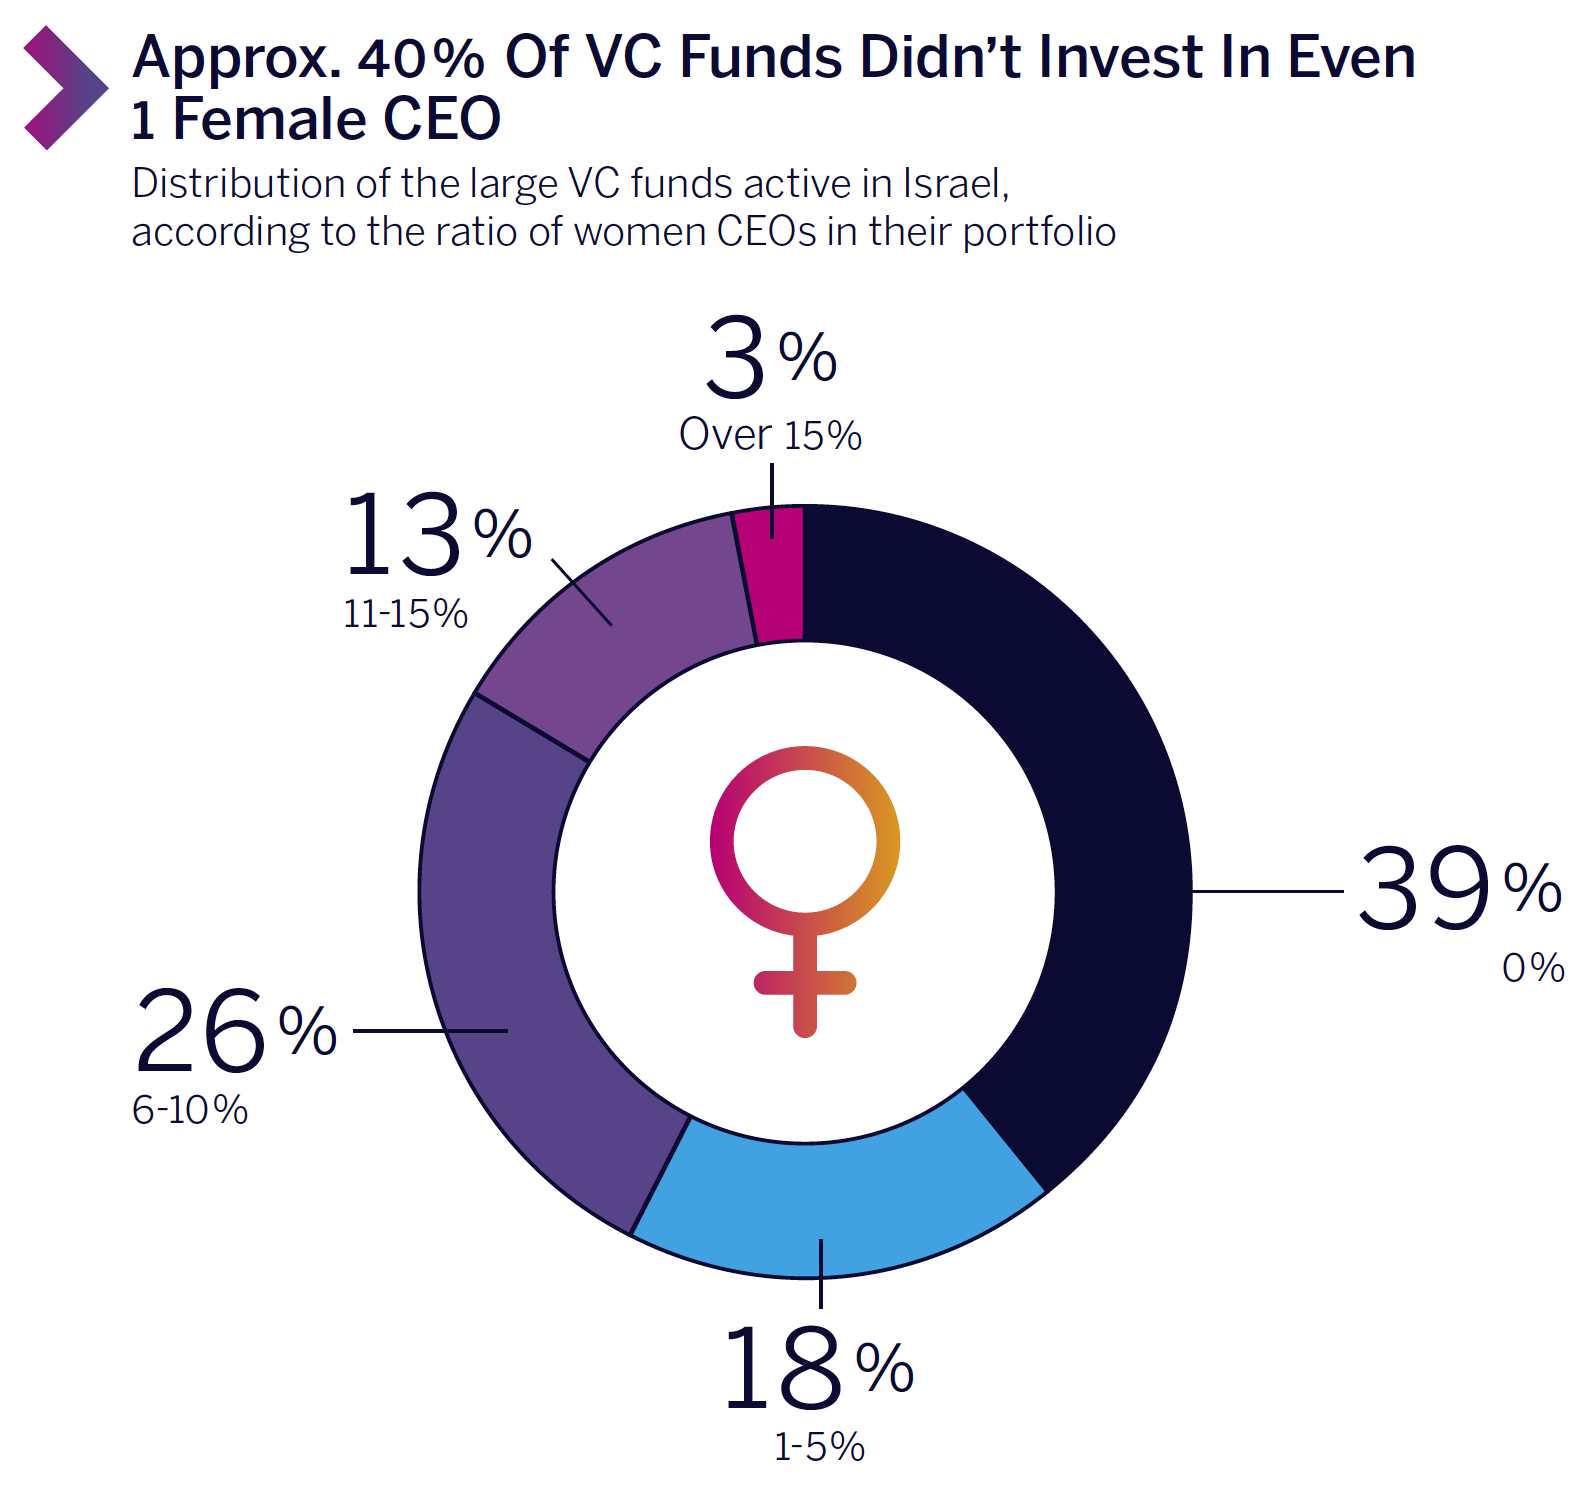 Approx. 40% Of VC Funds Didn't Invest In Even 1 Female CEO